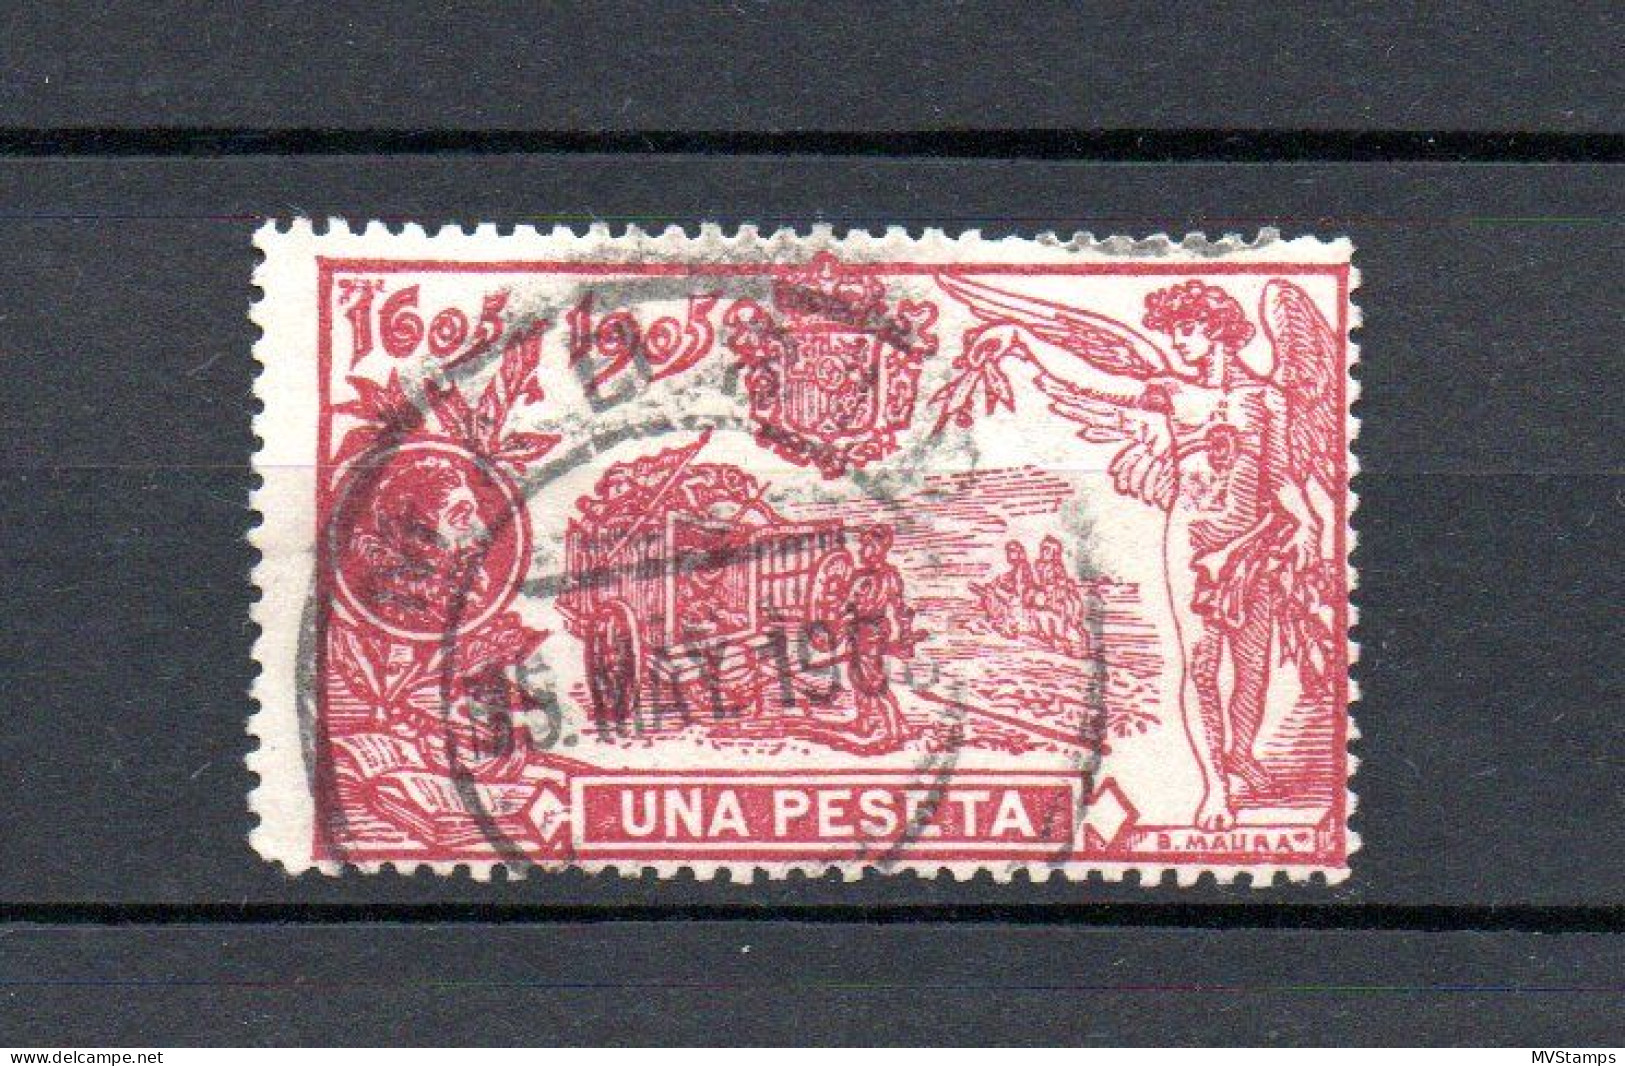 Spain 1905 Old 1 Peseta Don Quijote Stamps (Michel 227) Nice Used - Used Stamps